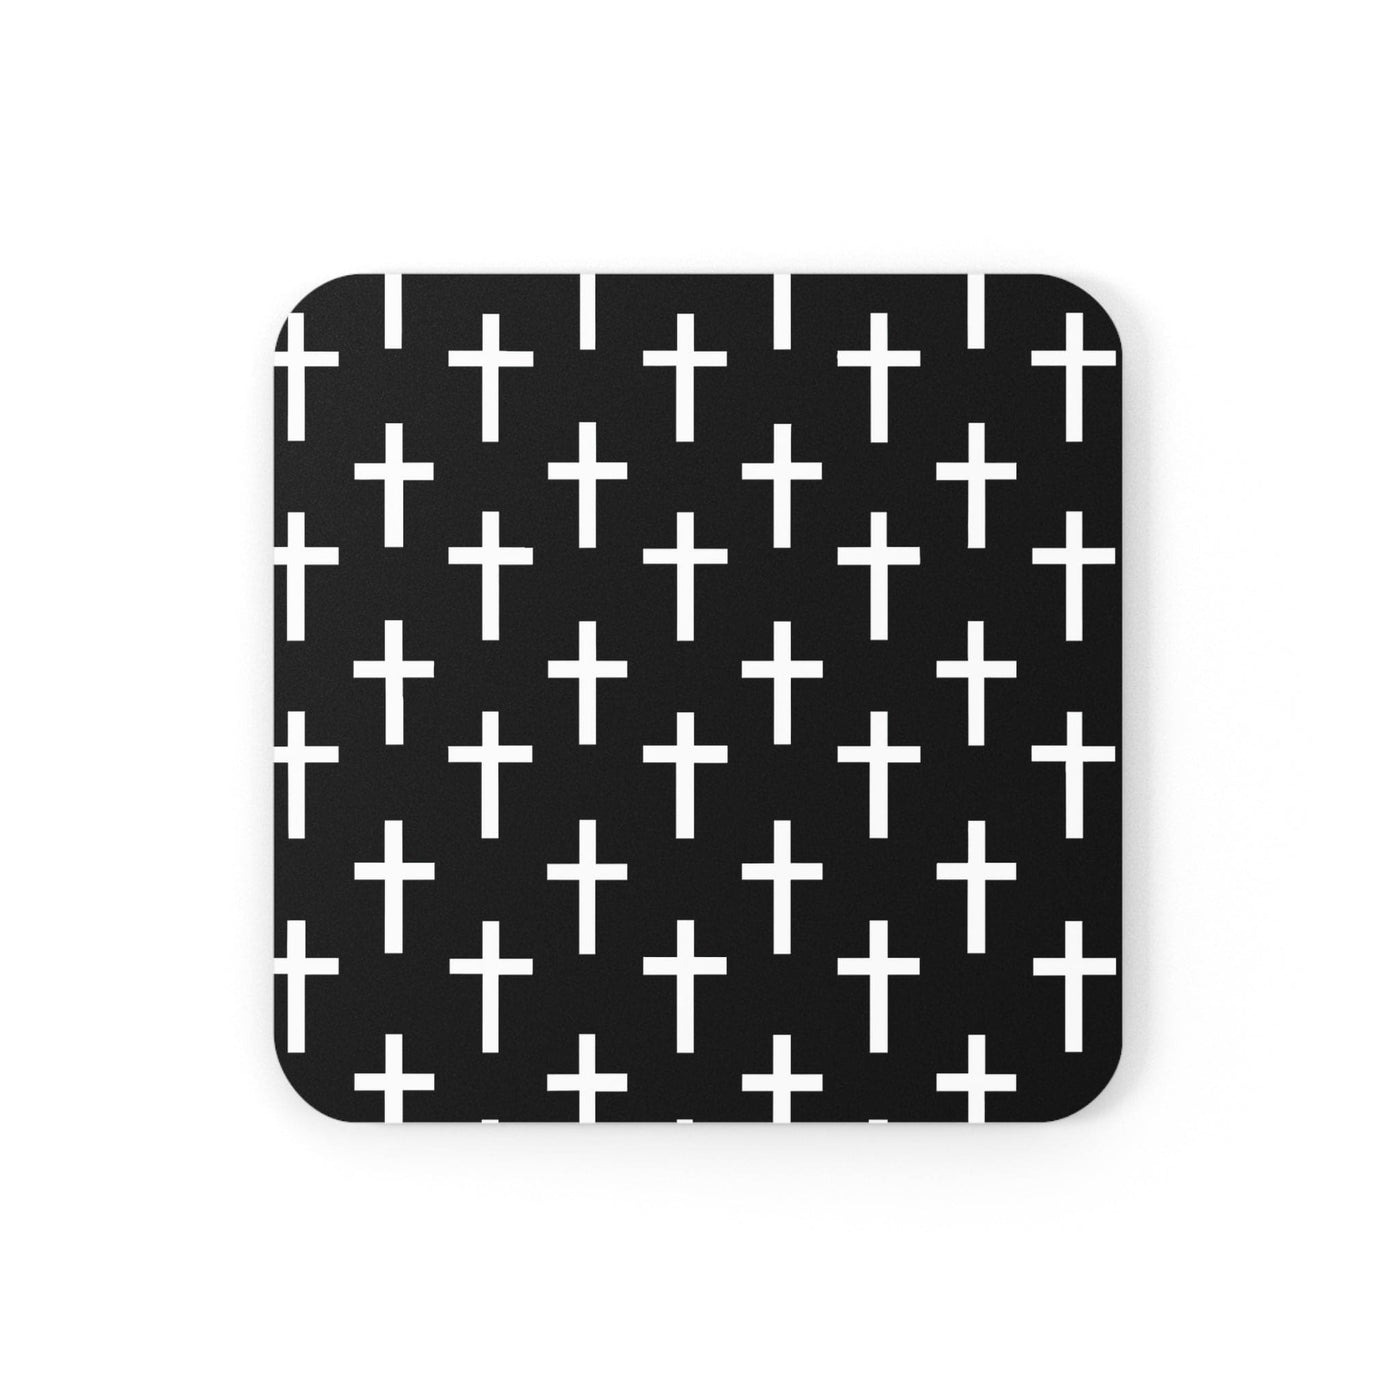 Coaster Set Of 4 For Drinks Black And White Seamless Cross Pattern - Decorative